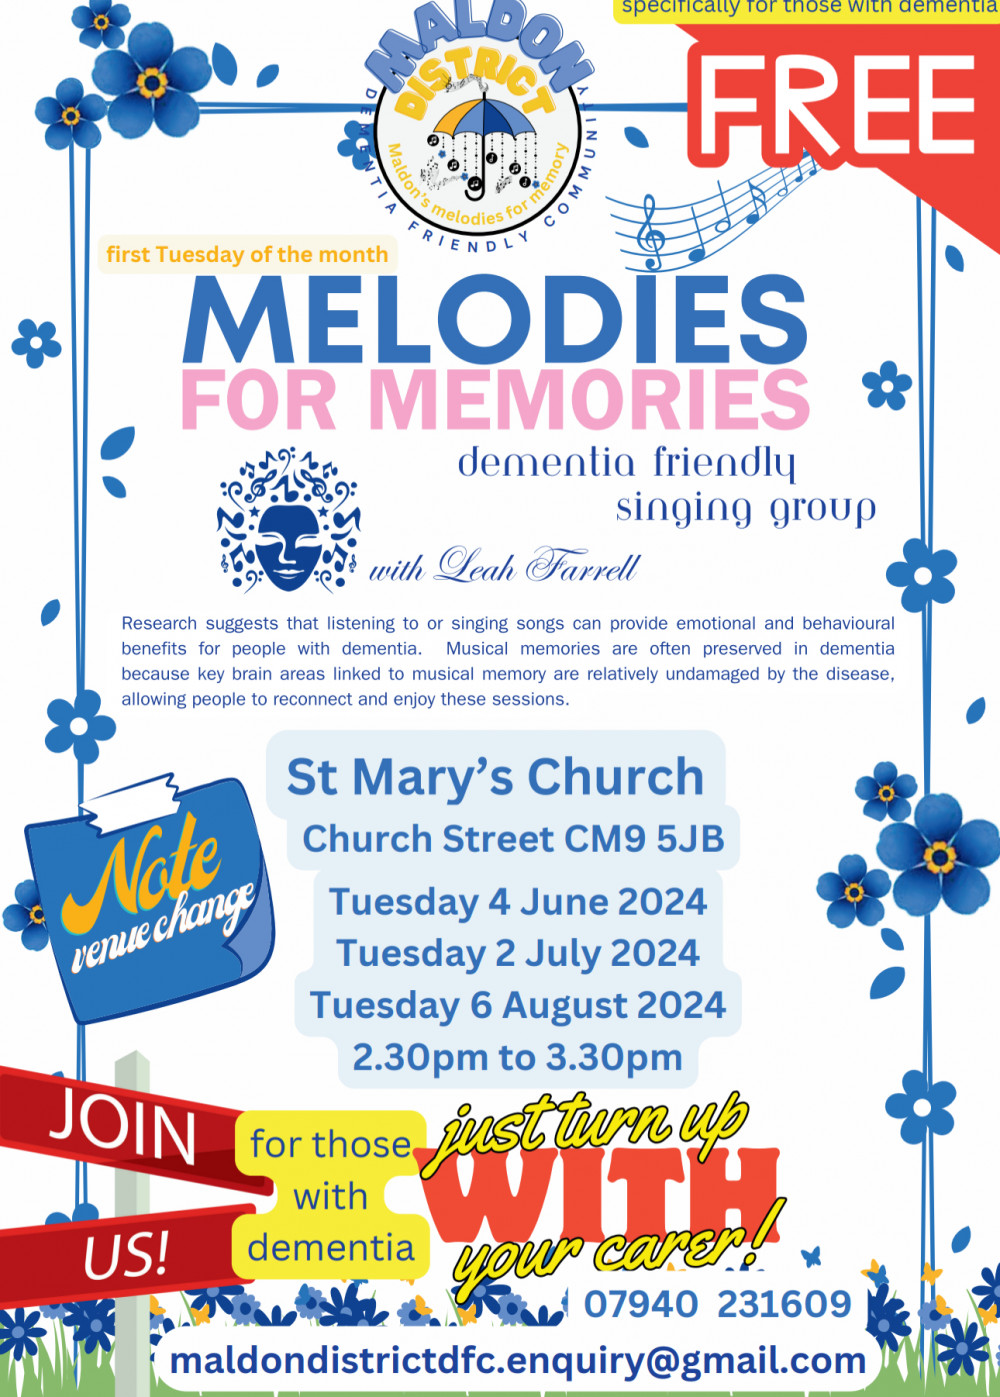 "Melodies for Memories" Dementia friendly singing geoup